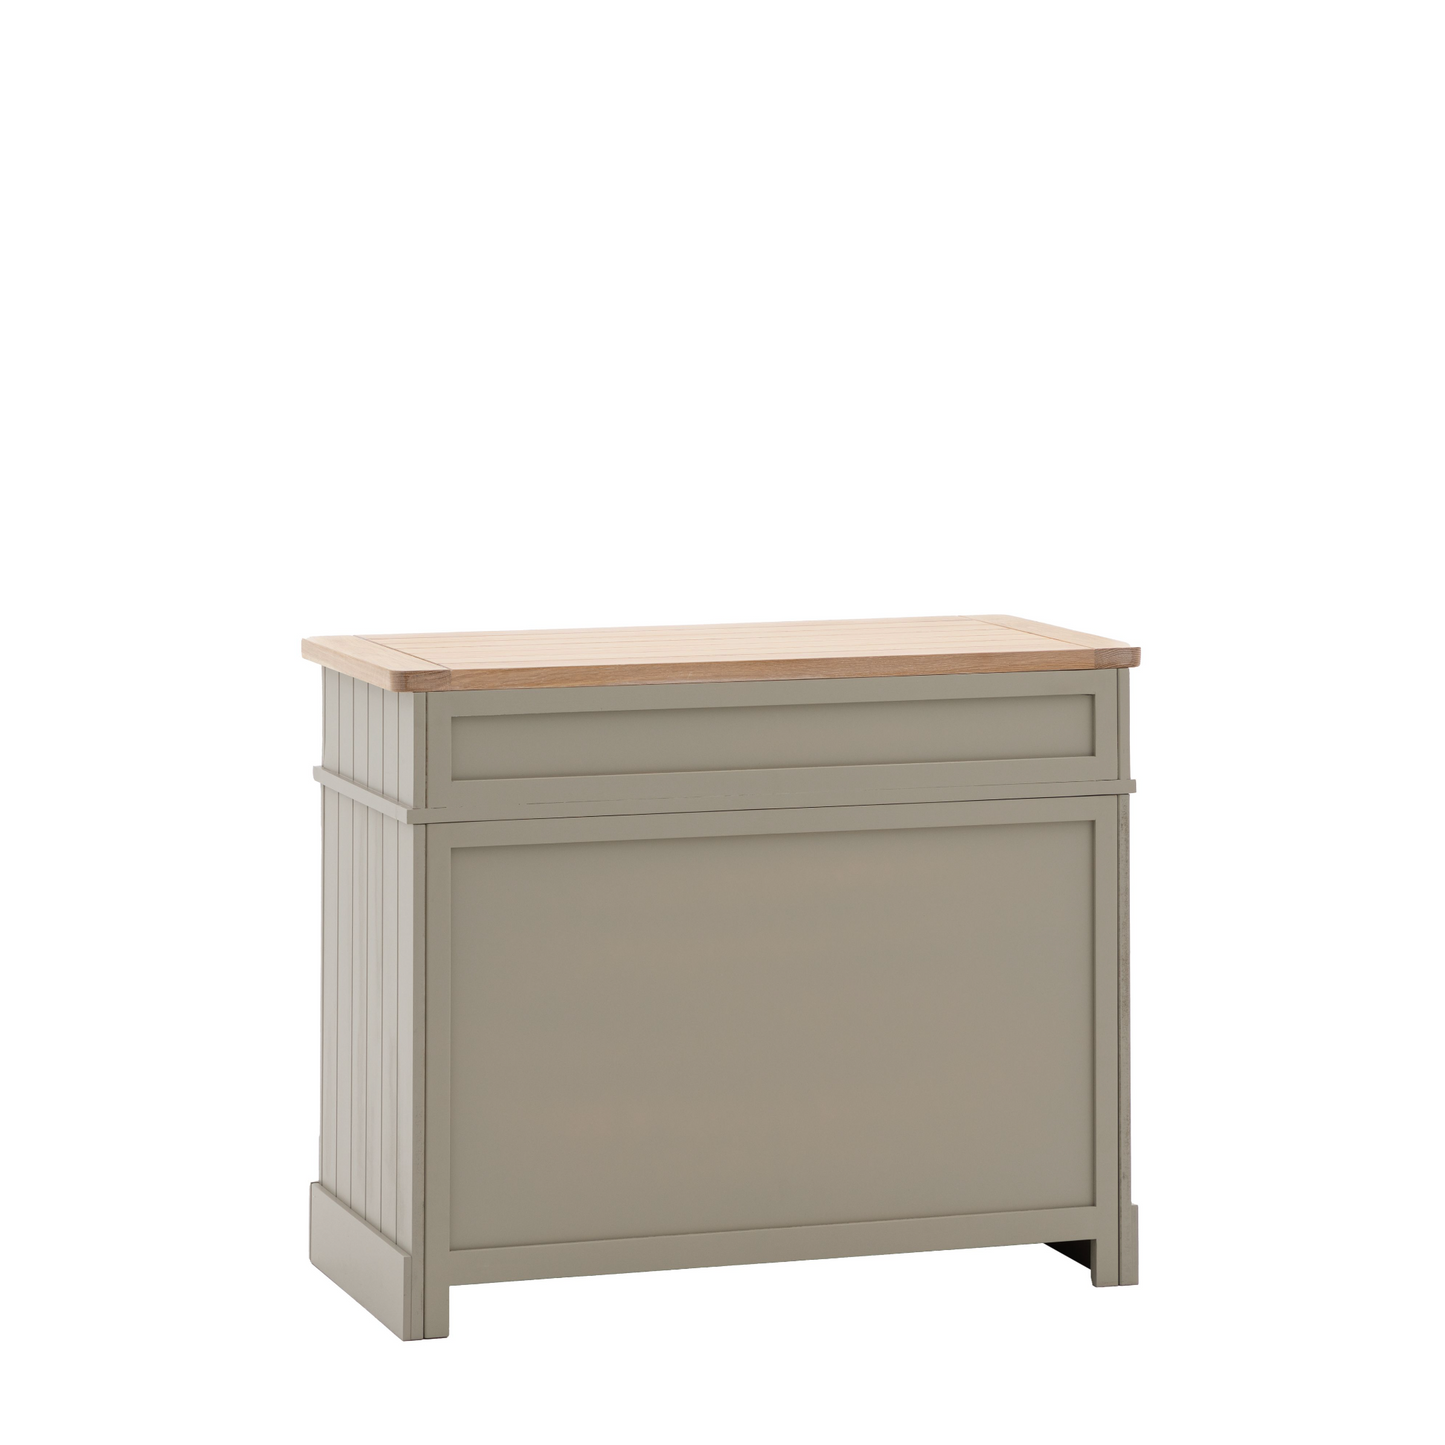 A small grey Buckland 2 Door 1 Drawer Sideboard with a wooden top in Prairie, perfect for interior decor and home furniture.